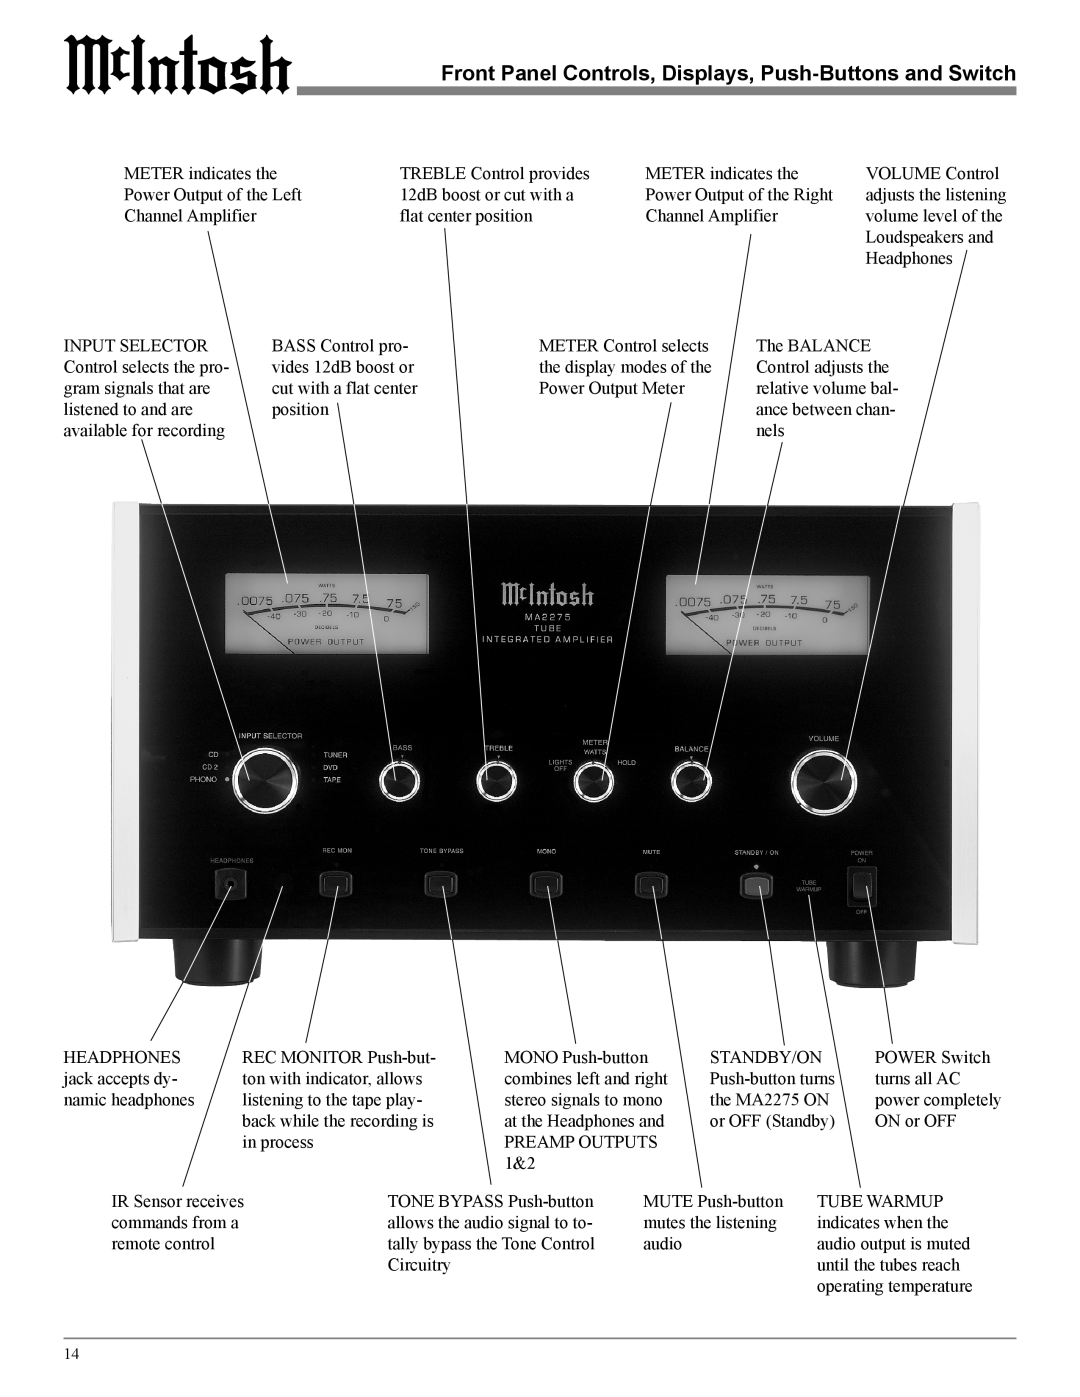 McIntosh MA2275 owner manual METER indicates the 